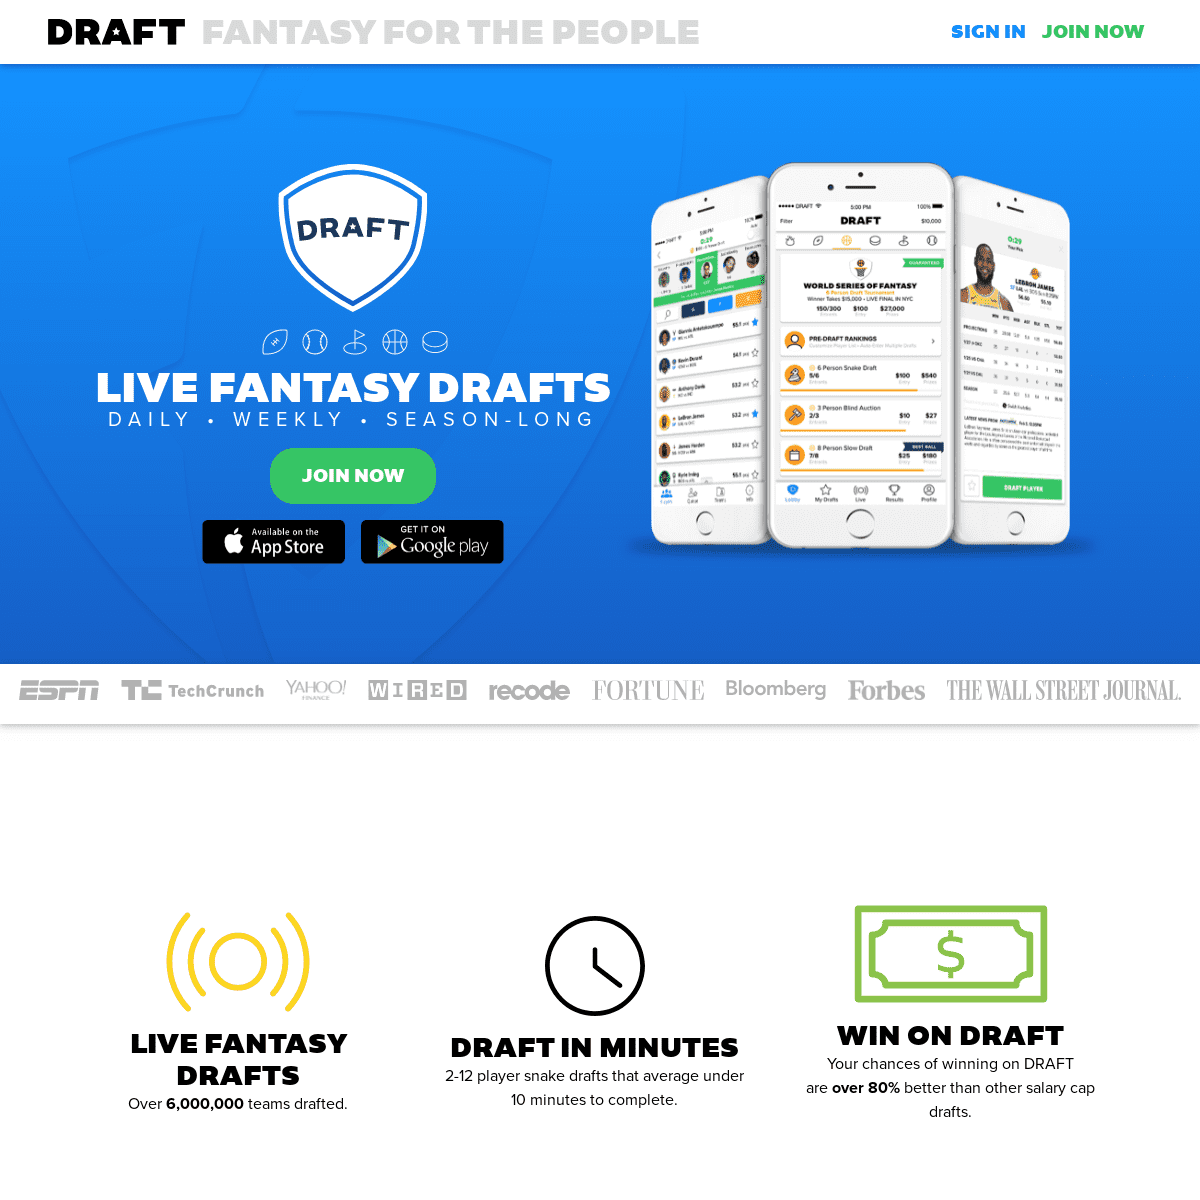 A complete backup of playdraft.com